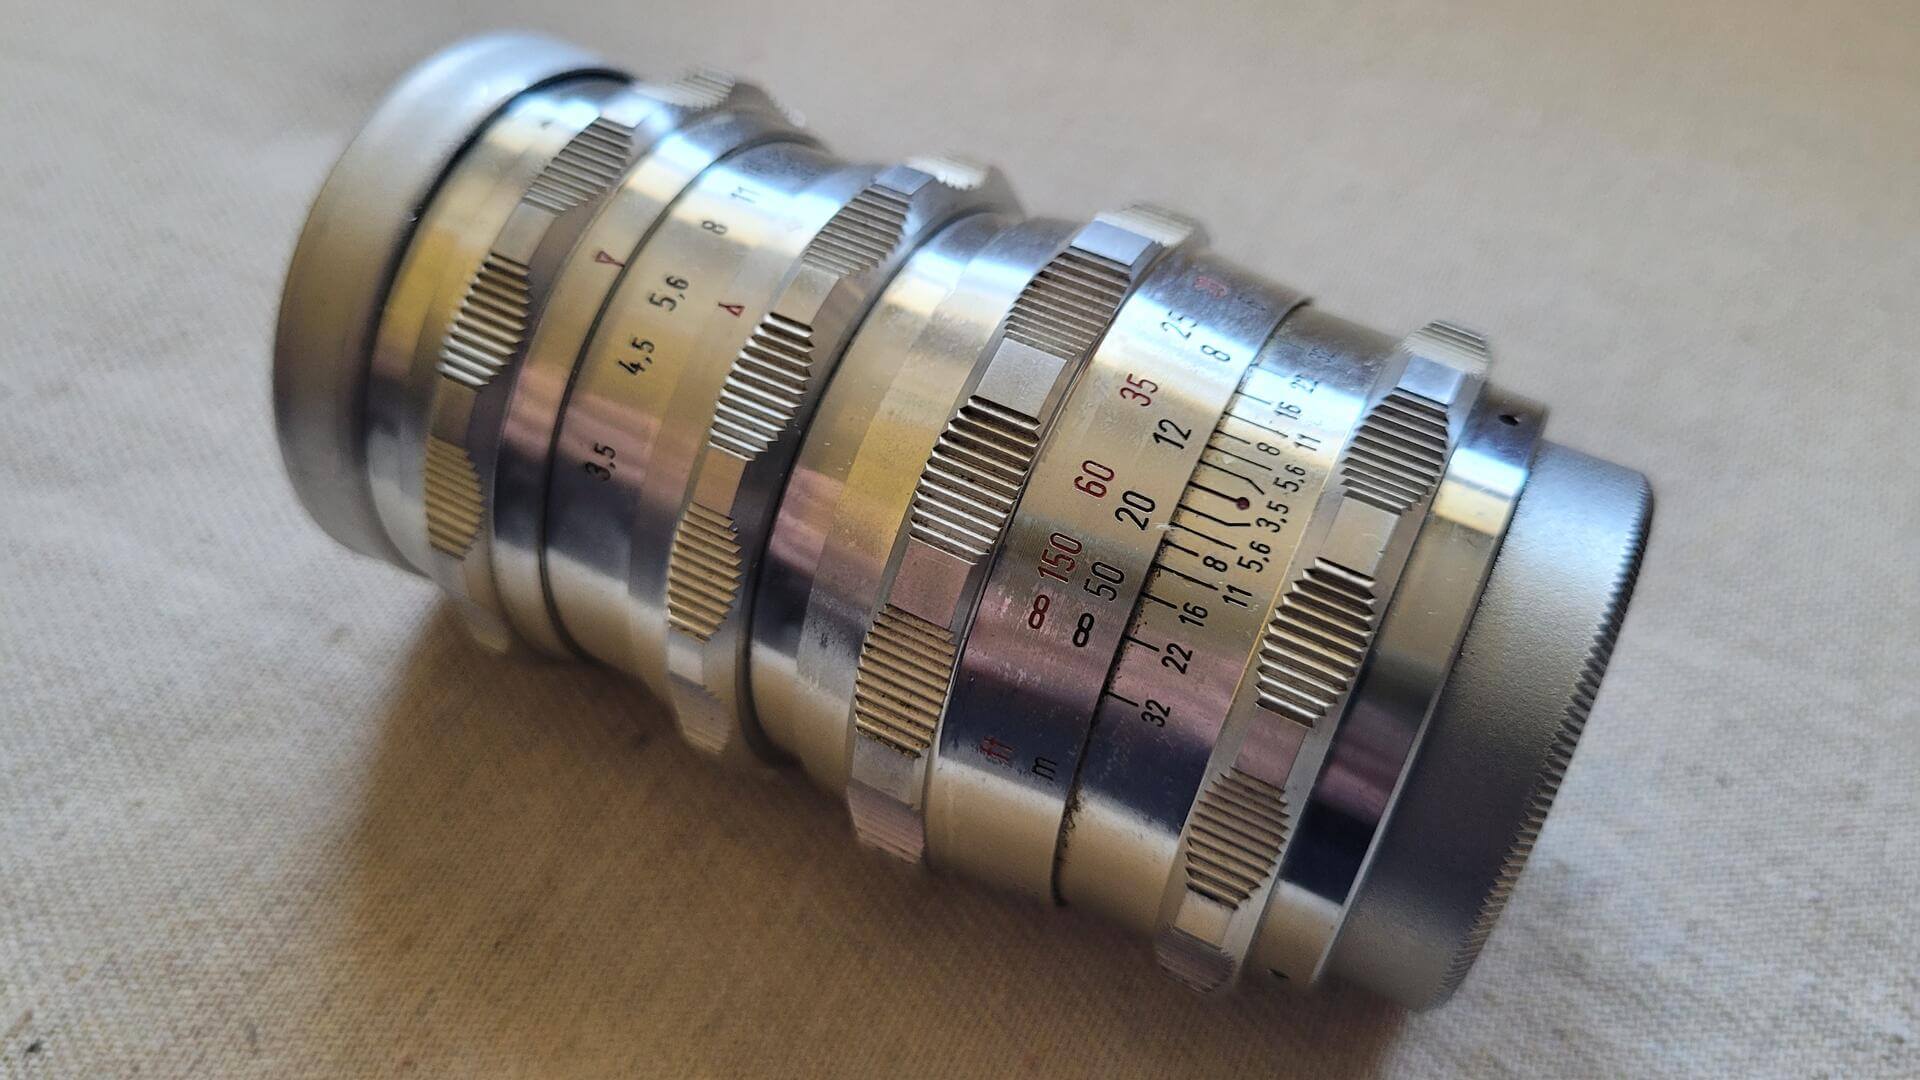 Fine vintage Albert Schacht 135mm f/3.5 Travenar telephoto lens s/n 26096 manufactured between 1948 and 1954 in Munchen. Rare MCM made in Germany collectible manual focus photography equipment accessory for a 35mm SLR system with M42 screw mount.